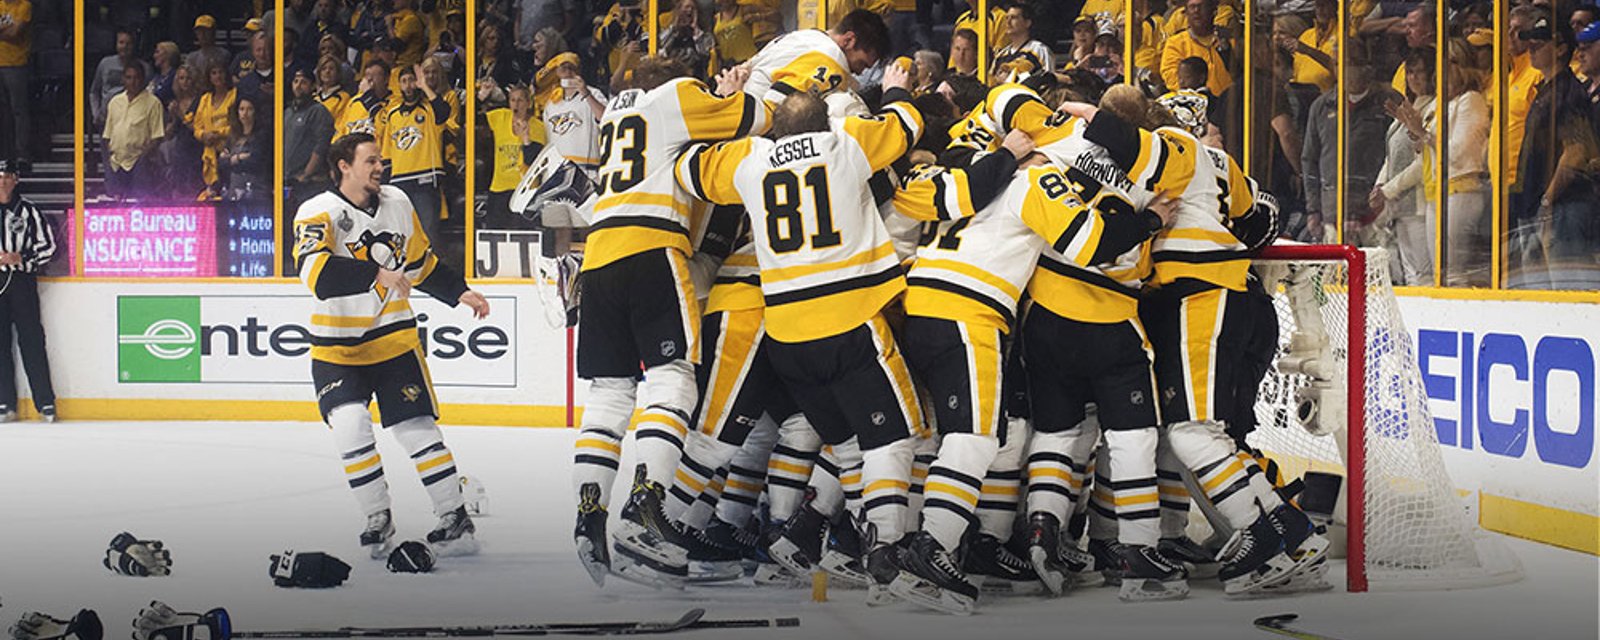 Every single goal from the Penguins Stanley Cup championship season